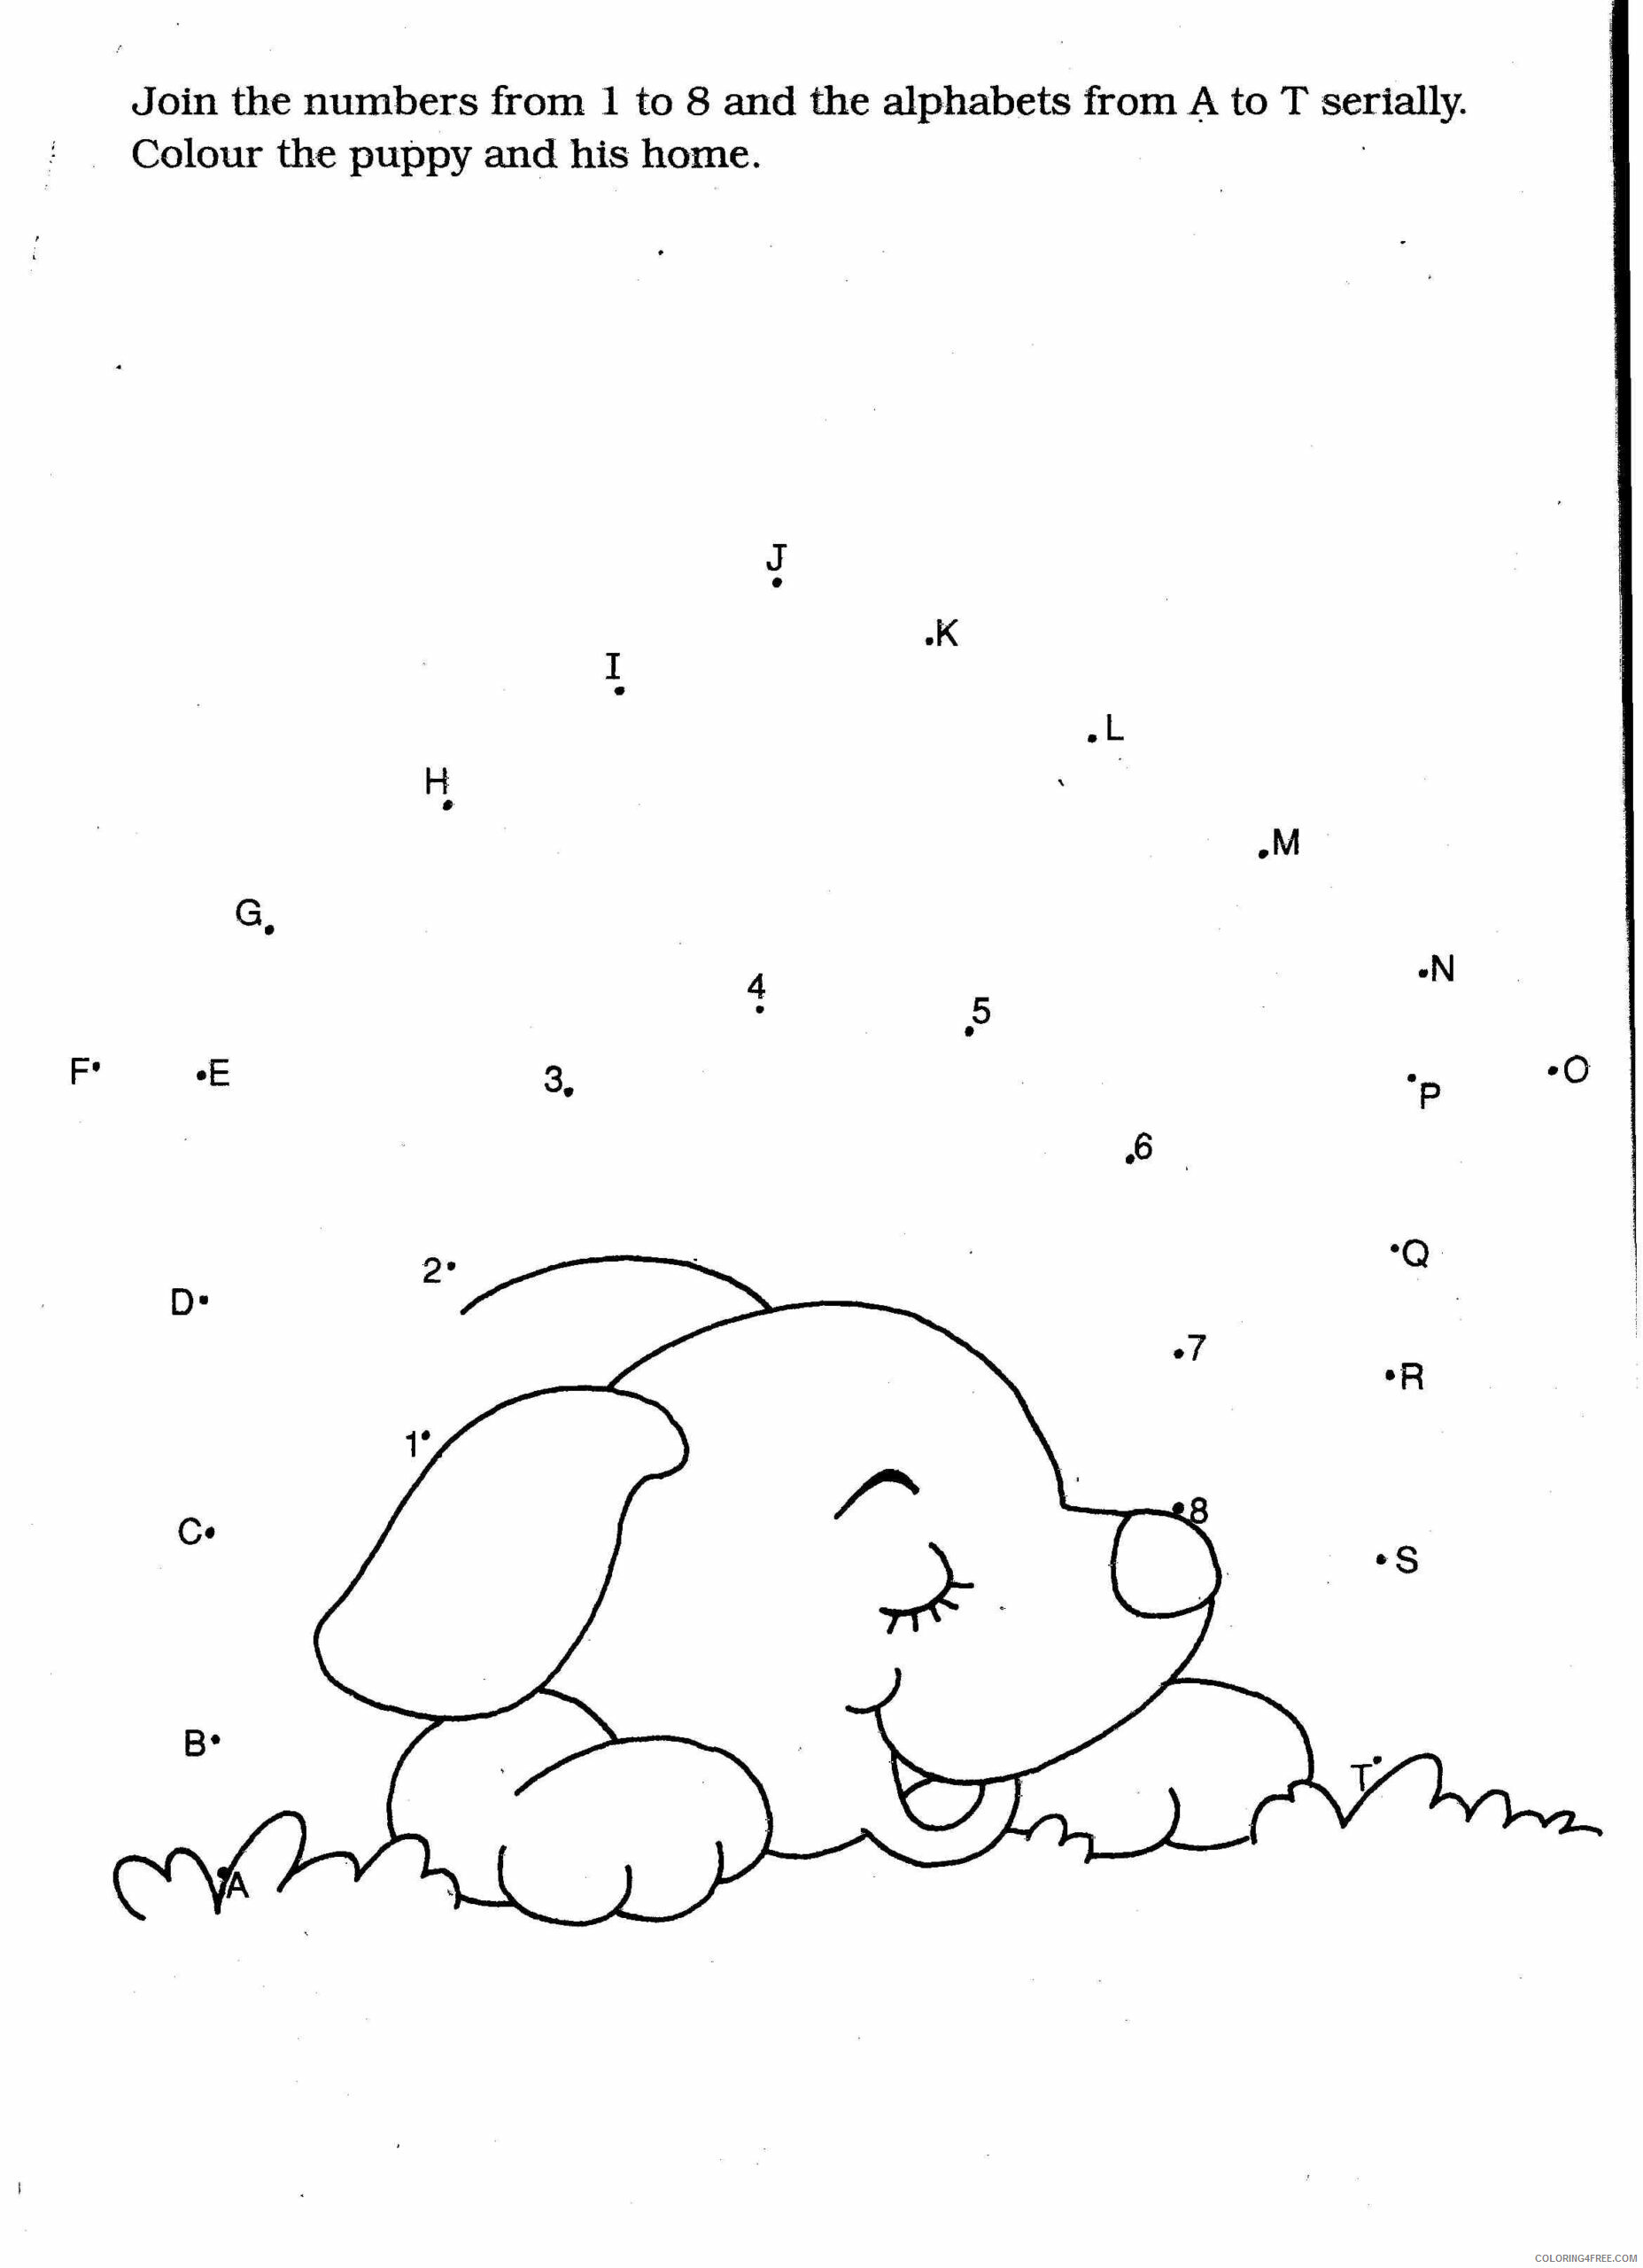 Adorable Puppy Coloring Pages Printable Sheets Puppy Related Keywords 2021 a 1726 Coloring4free